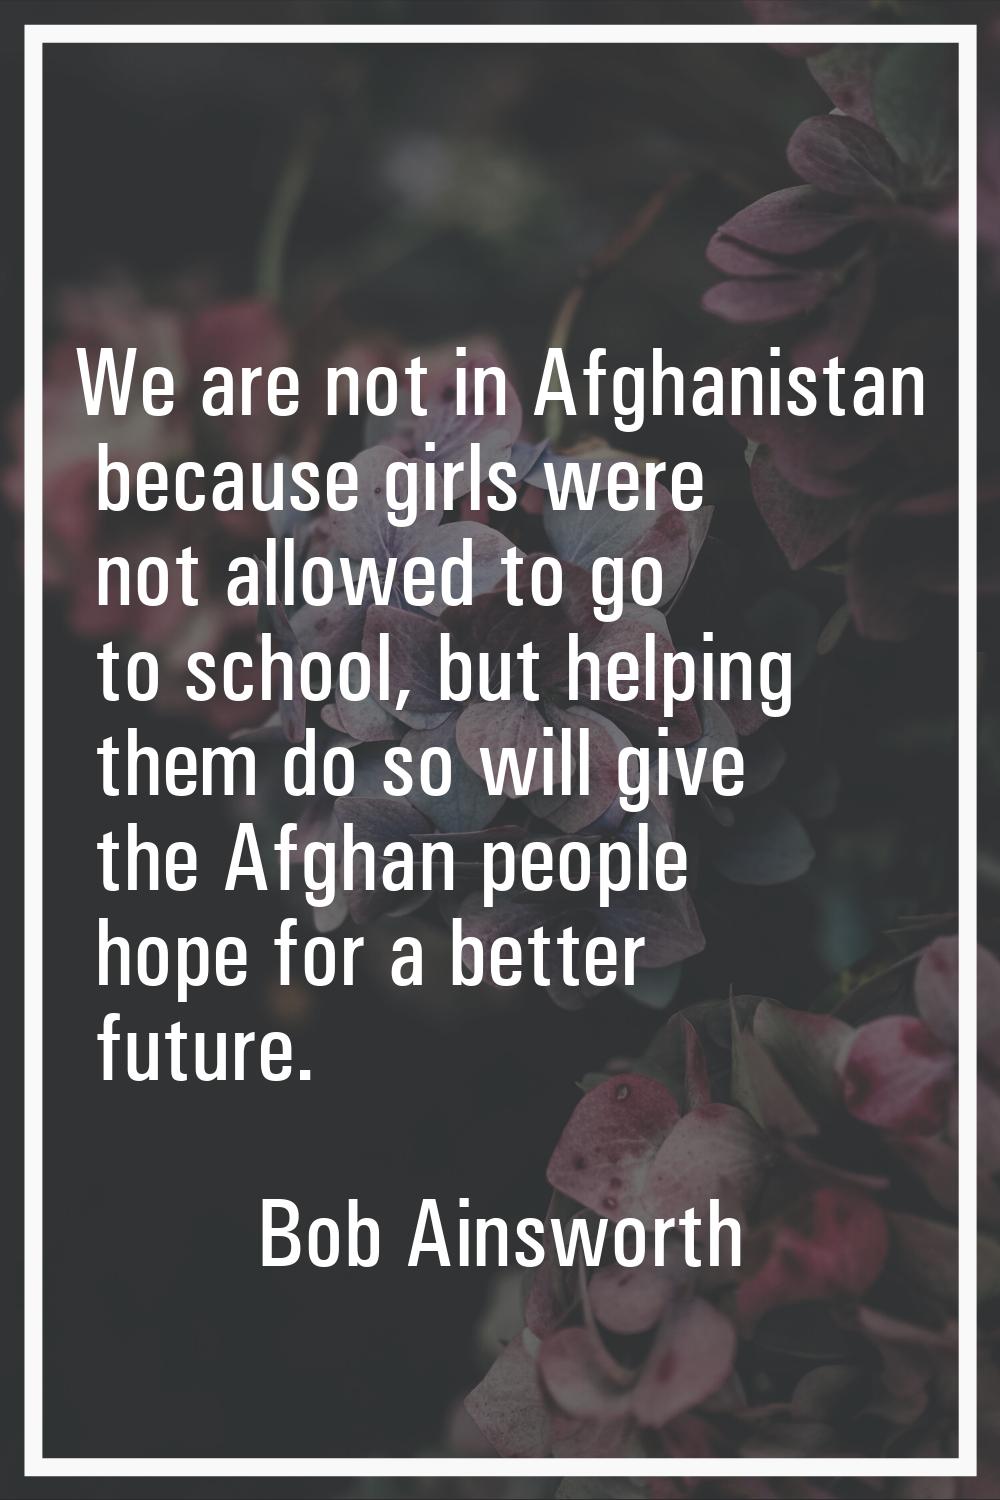 We are not in Afghanistan because girls were not allowed to go to school, but helping them do so wi